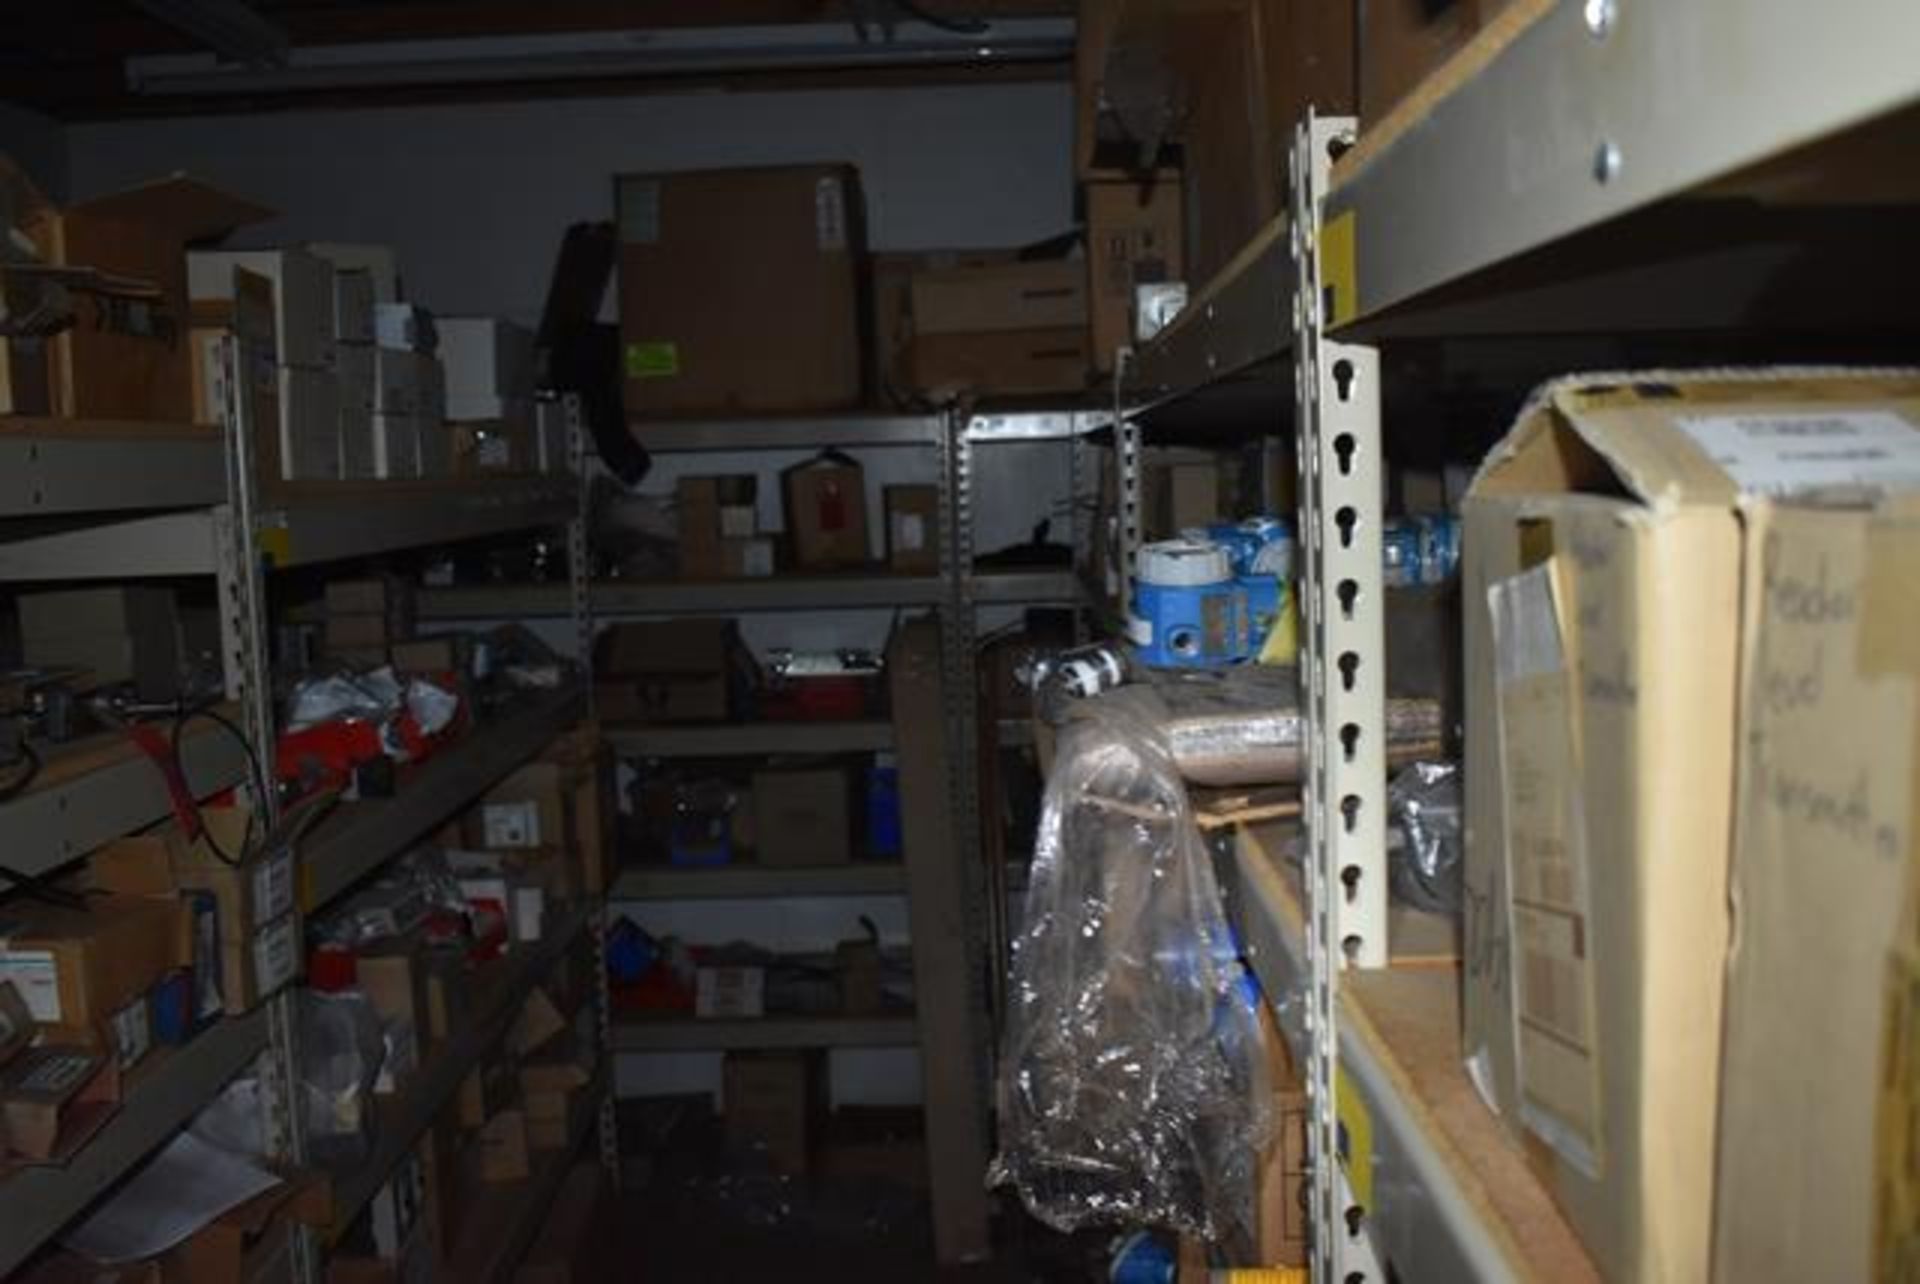 Stores Area Contents - (12) Shelf Sections, Bearings, Burner Parts, Eaton/Allen Bradley Electrical - Image 6 of 7